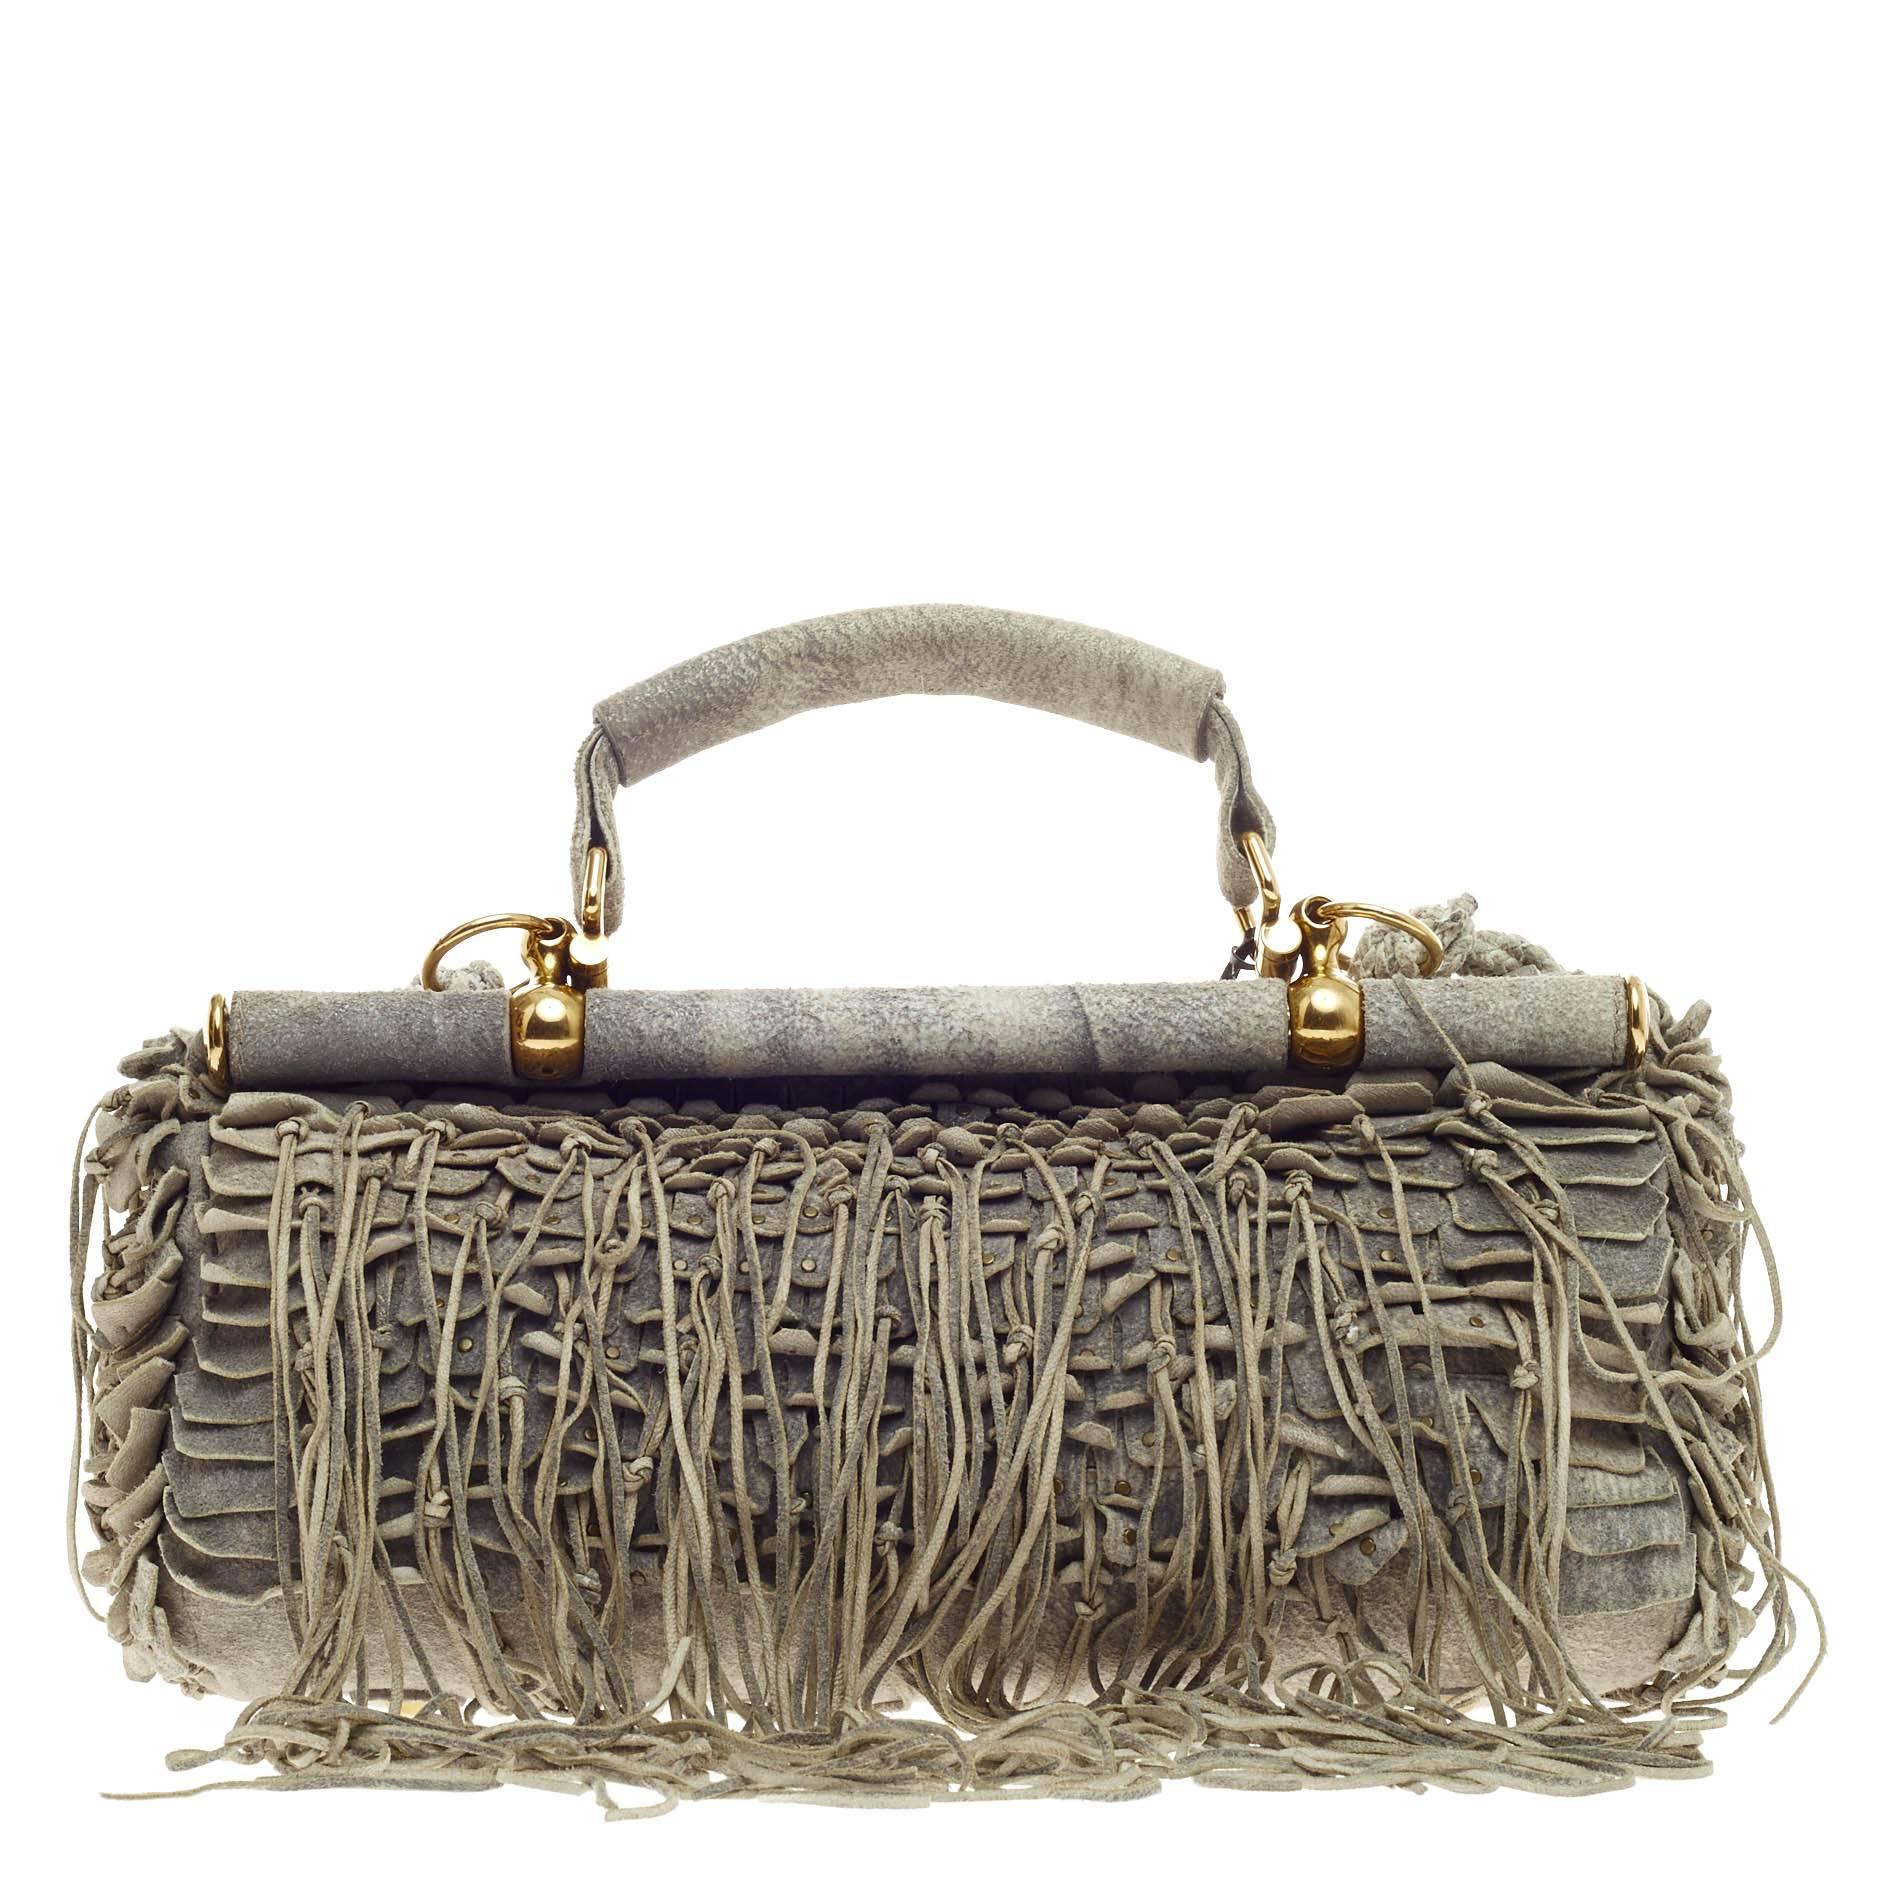 This authentic Roberto Cavalli Fringed Doctor Bag Distressed Suede debuting in 2011 mixes unique bohemian-glamour perfect for the most daring of fashionistas. Crafted in gray distressed suede, this eye-catching doctor bag features cascading knotted